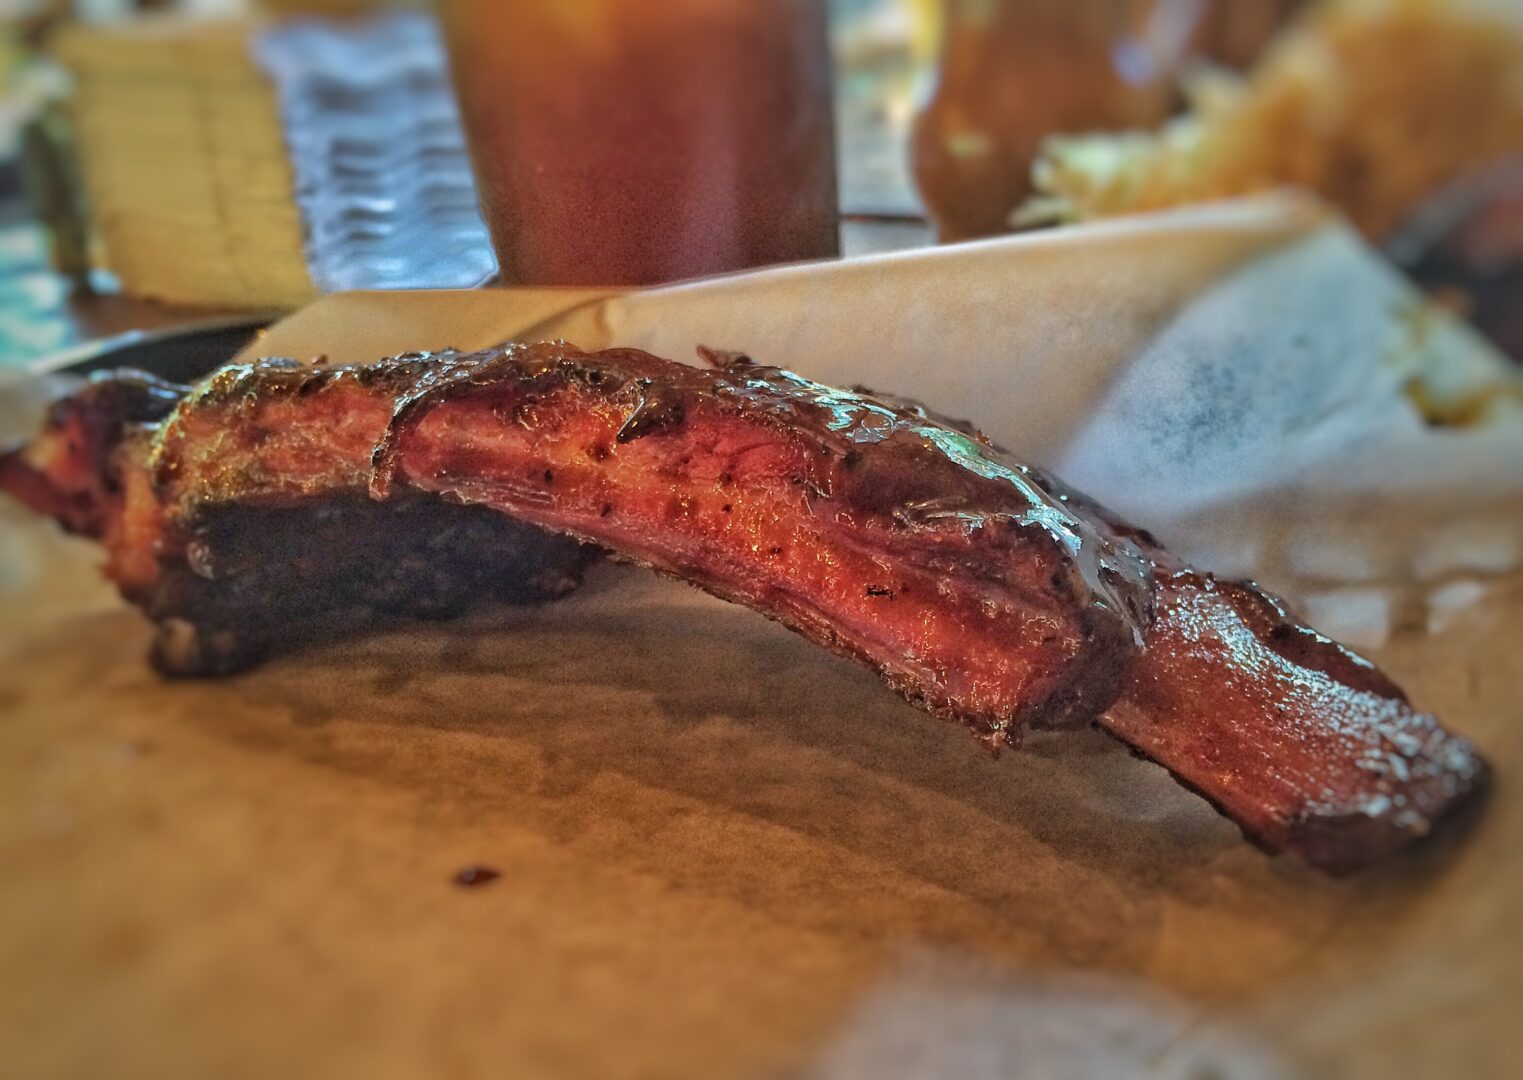 A piece of ribs on a piece of paper.